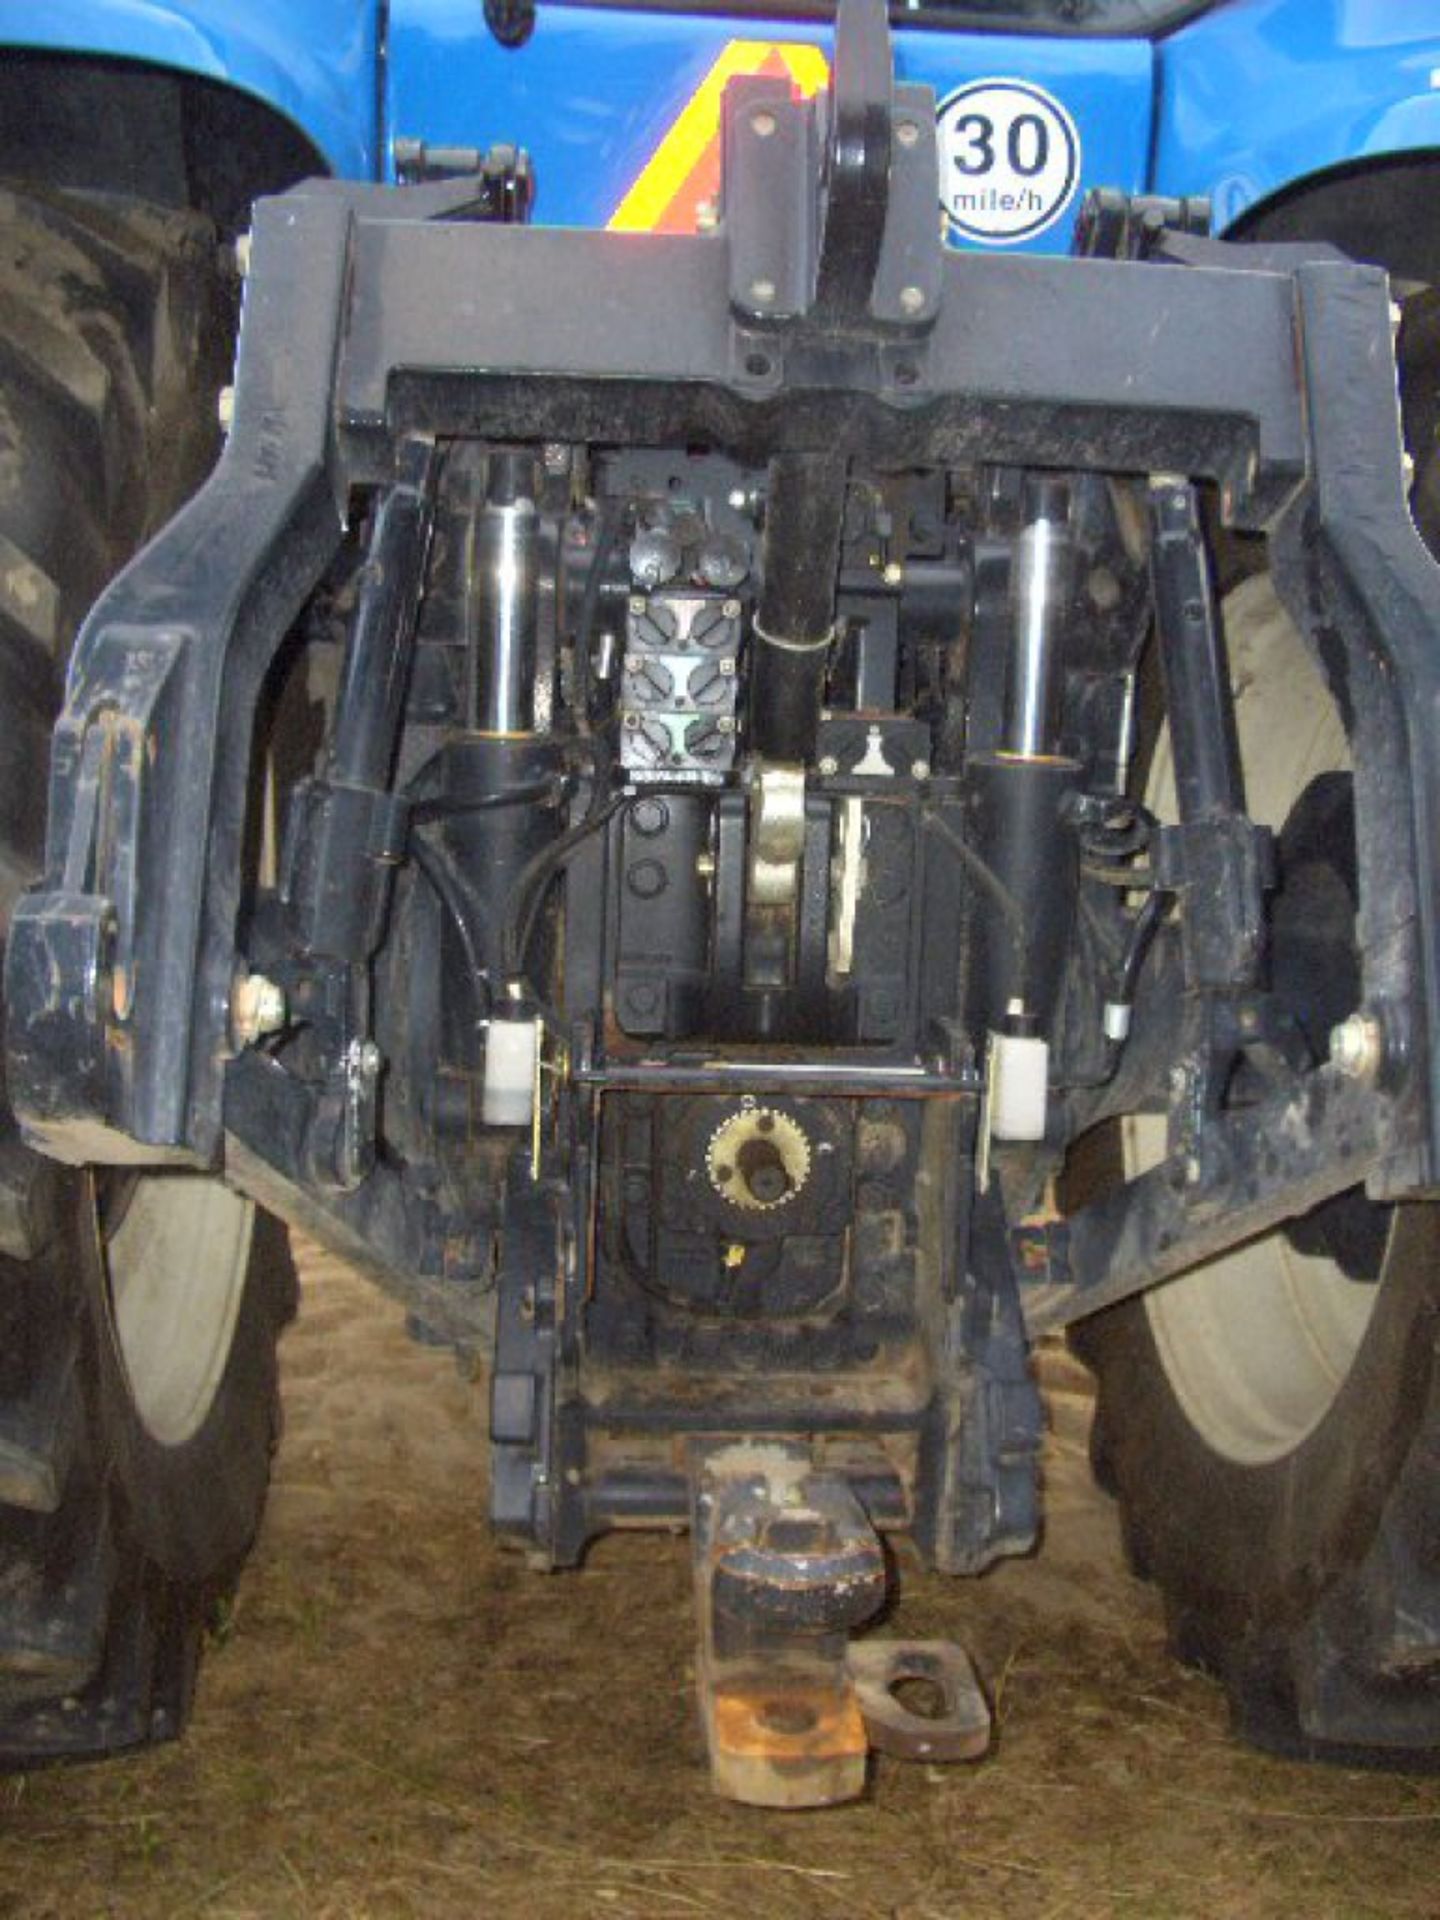 NH T8-390 MFWD Tractor - Image 4 of 4